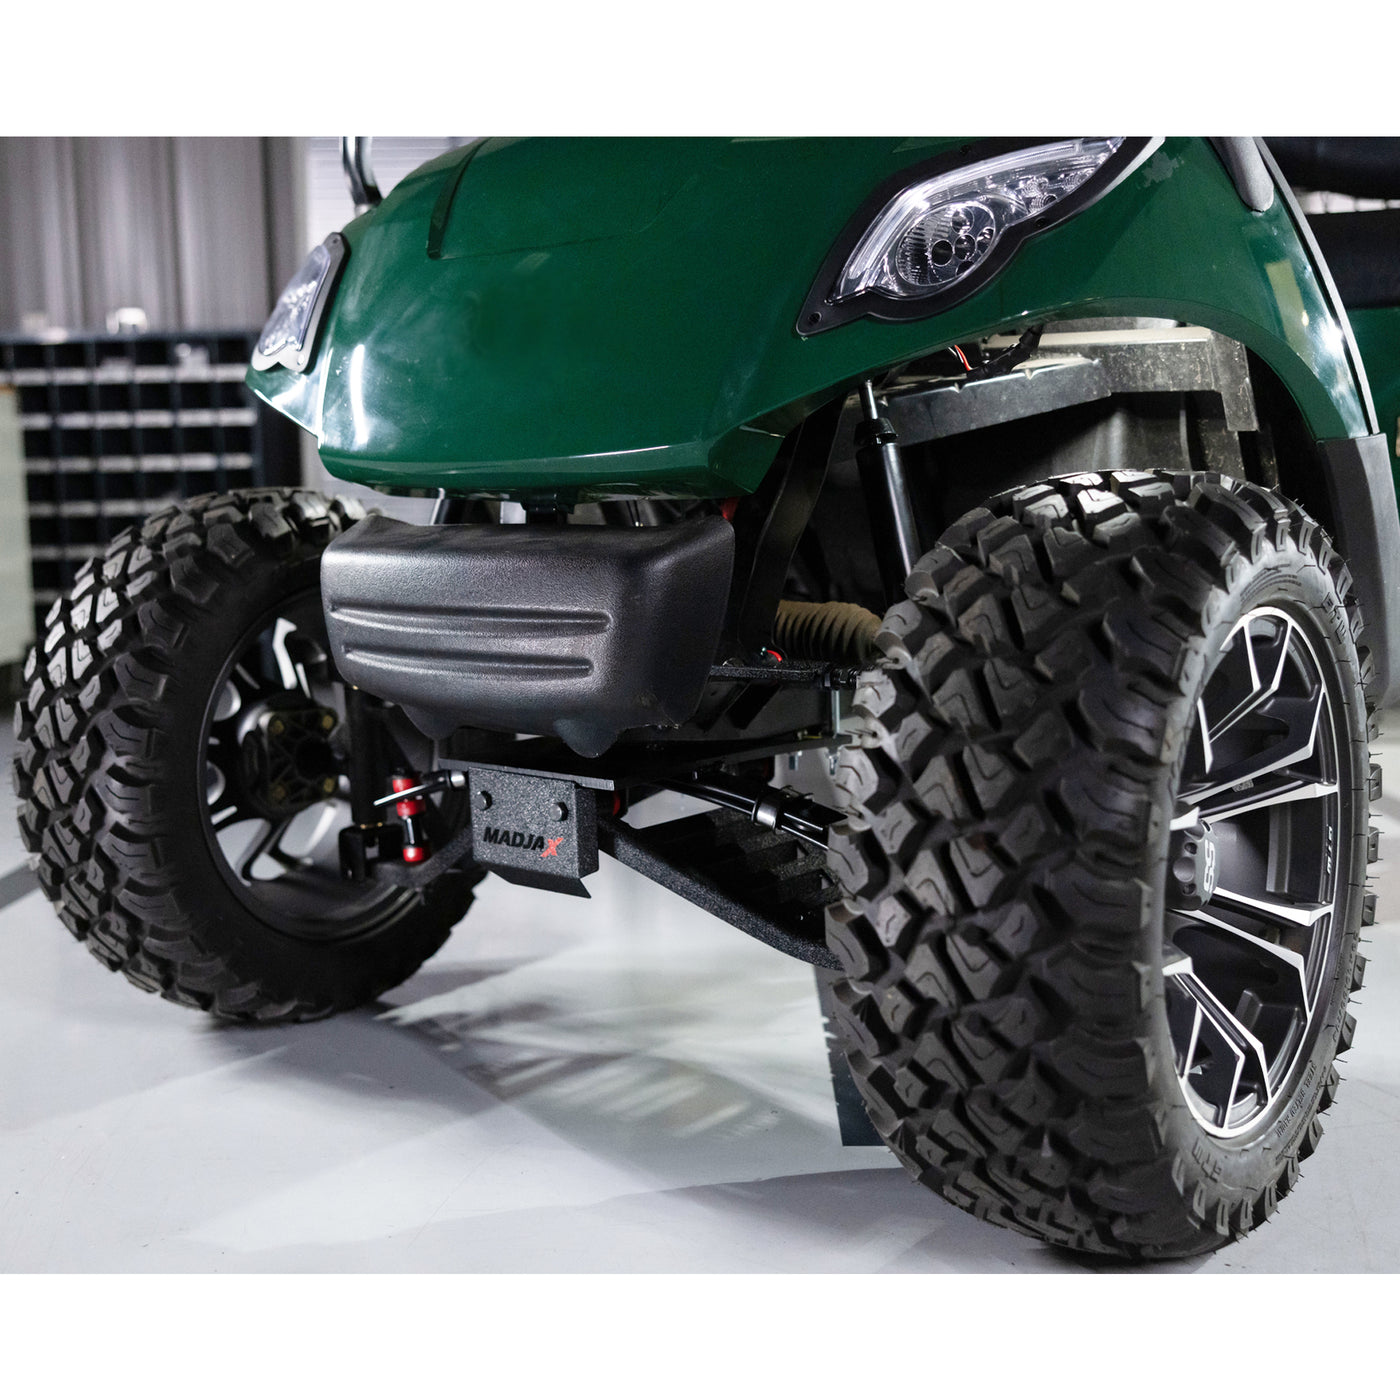 4" Madjax King XD Lift Kit for Yamaha G29/Drive/Drive2 with Solid rear axle